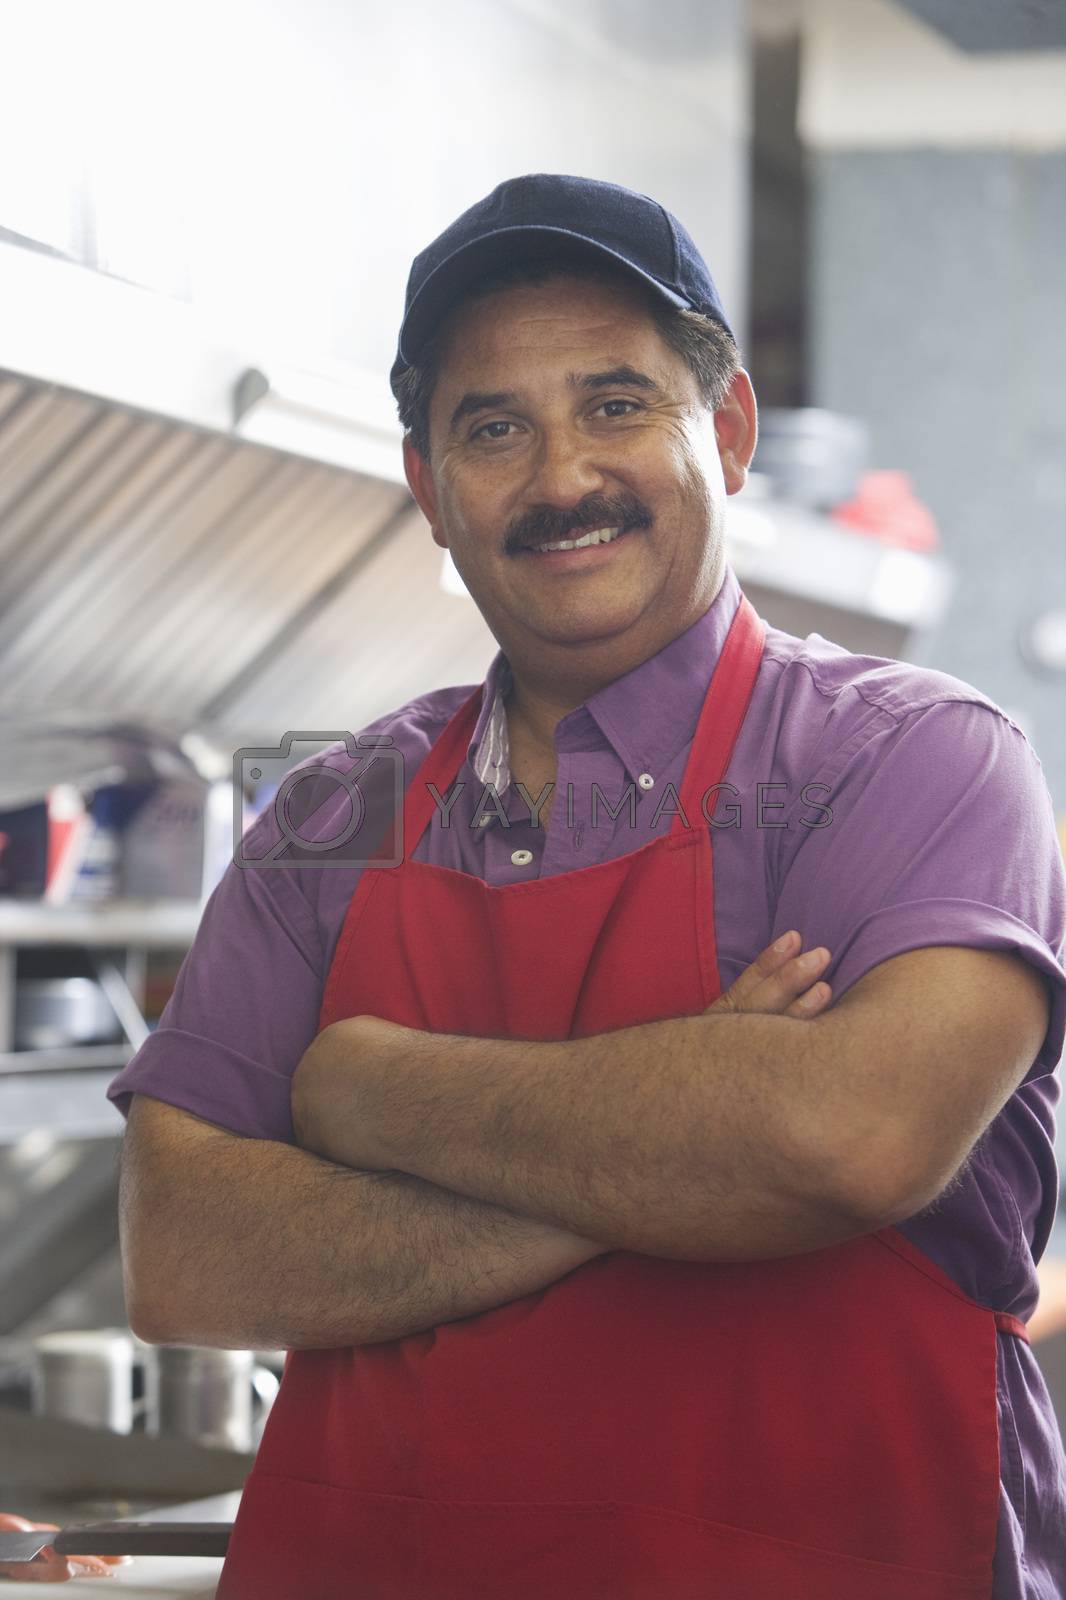 Royalty free image of Portrait of Hispanic Latin confident man standing with arms crossed in restaurant kitchen by moodboard